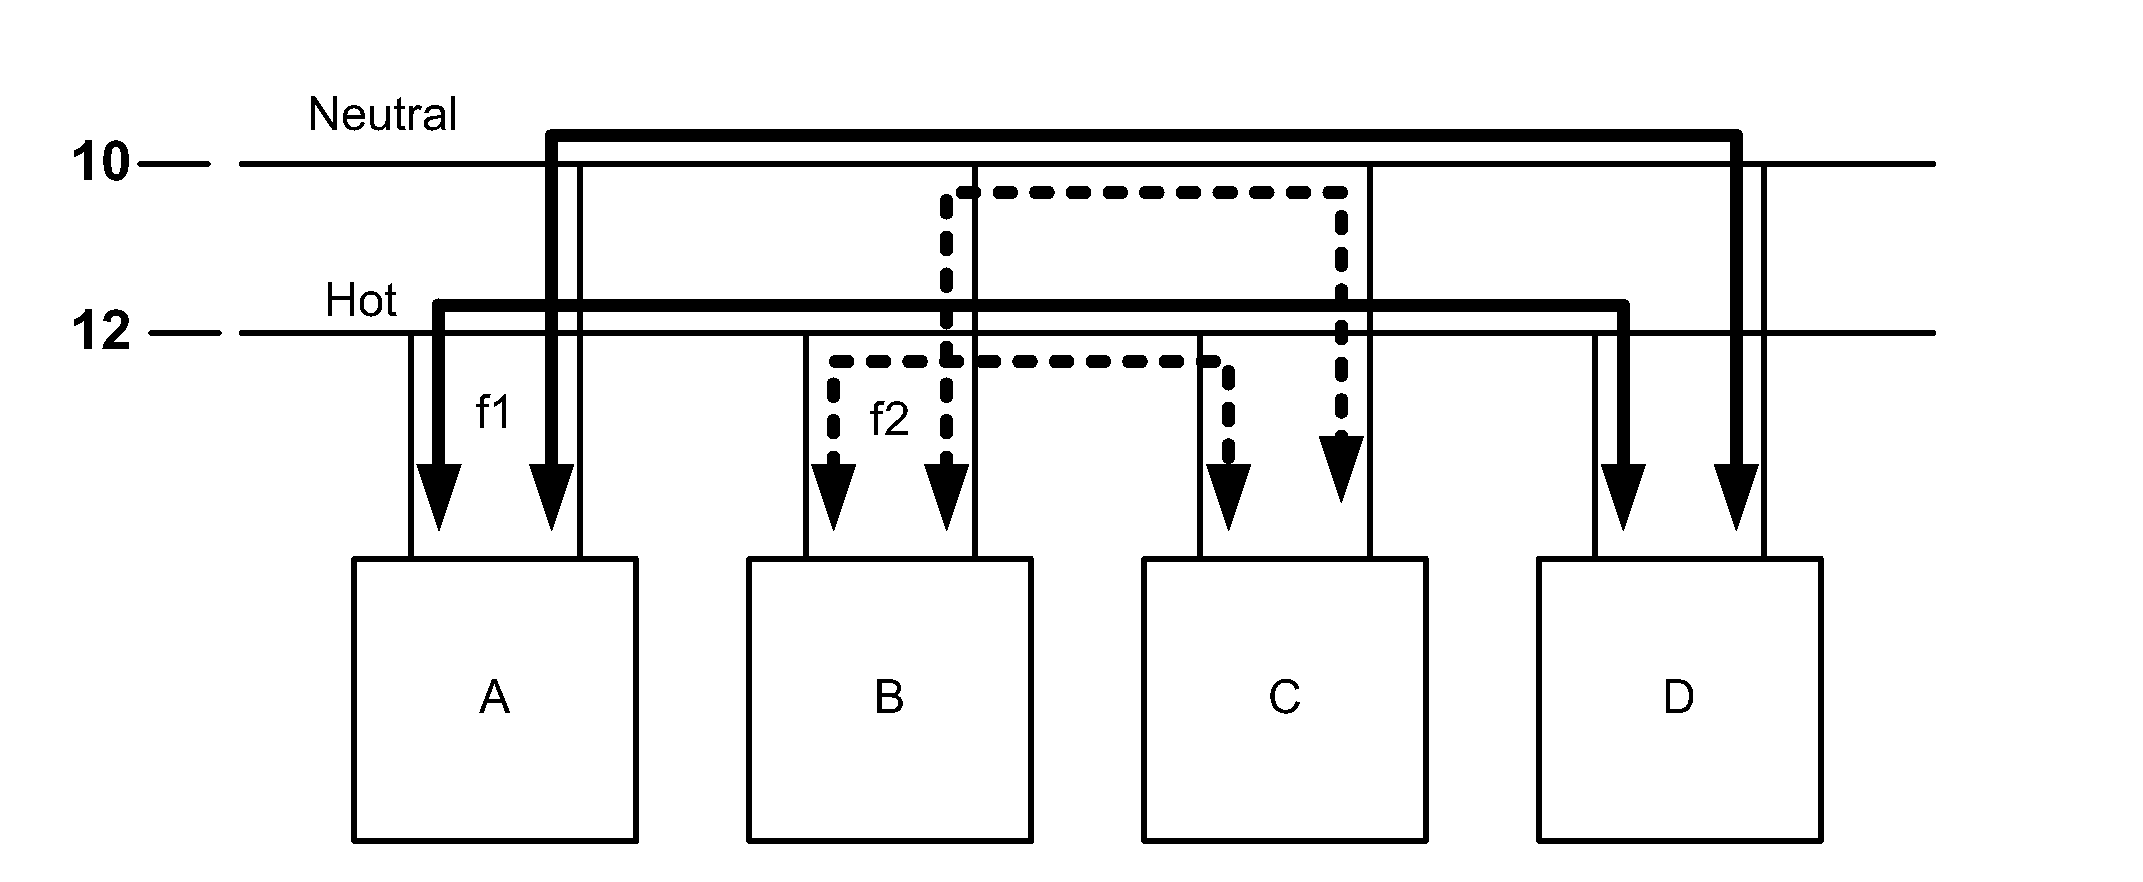 Power Line Communication Using Frequency Hopping